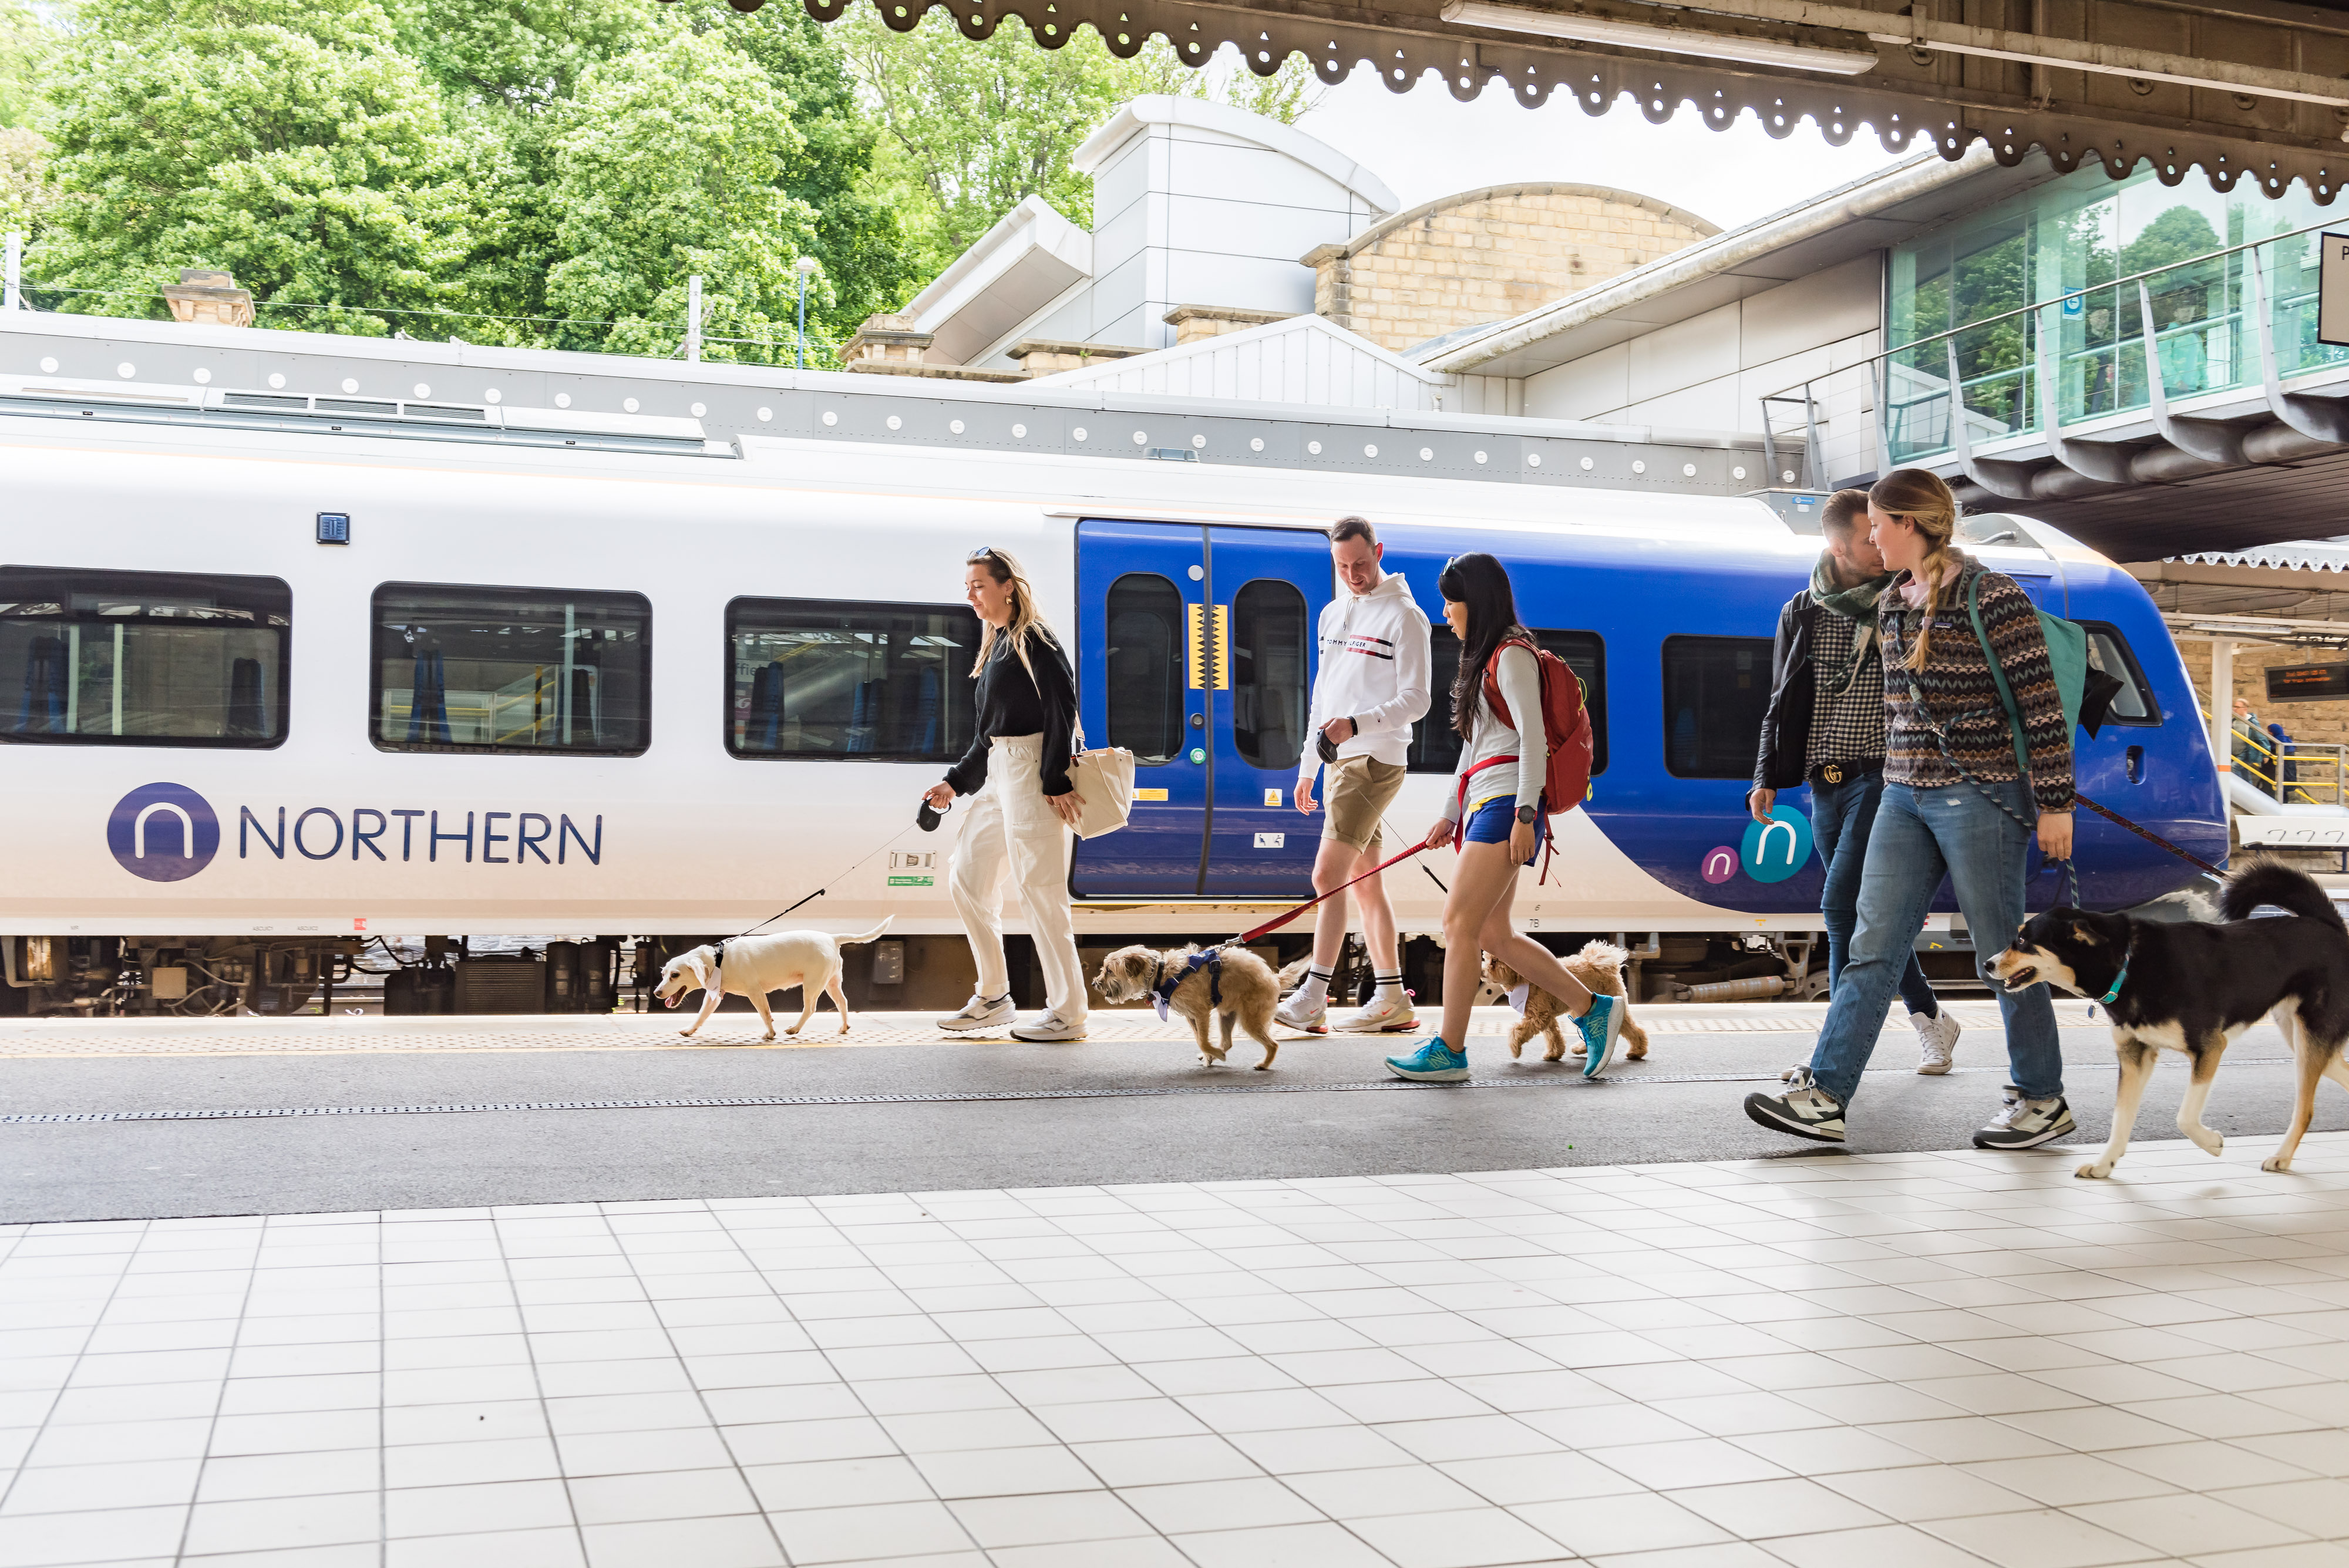 Image of dogs and their owners on a platform in front of a Northern train